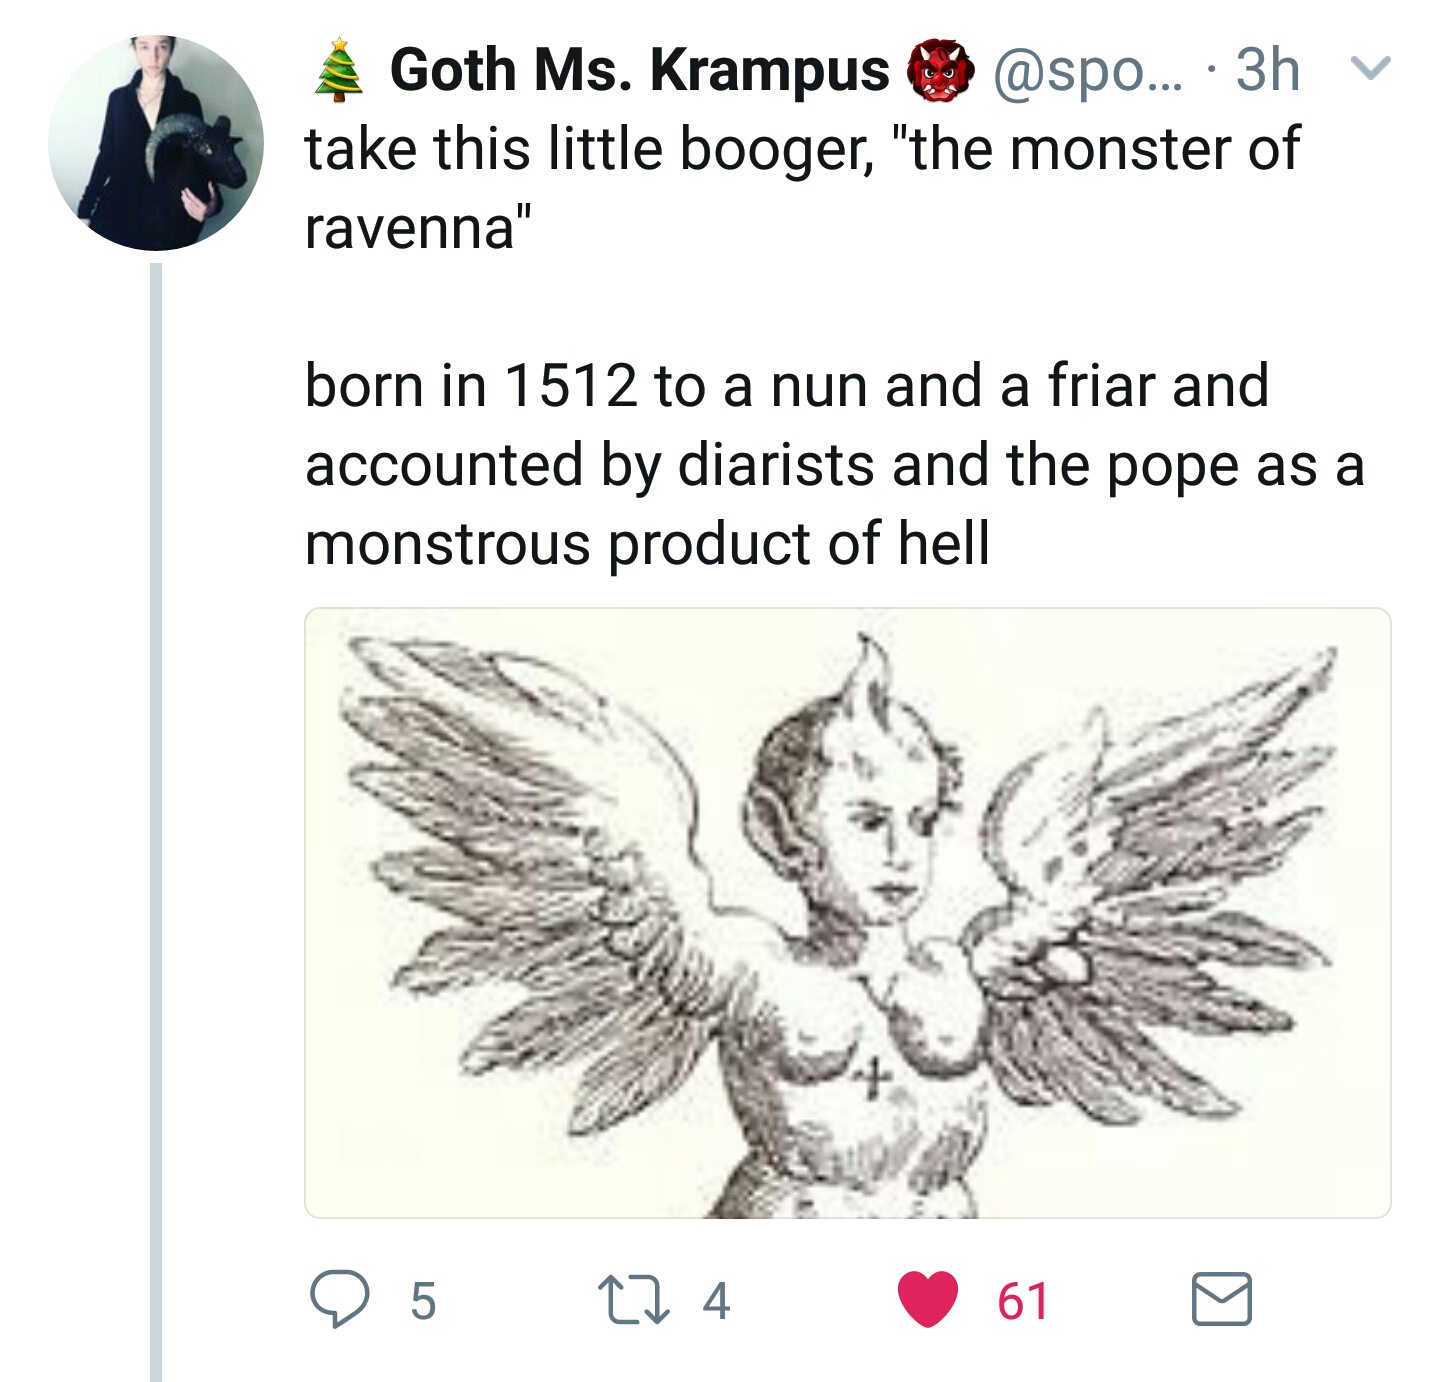 monster of ravenna - Goth Ms. Krampus ... 3h v take this little booger, "the monster of ravenna" born in 1512 to a nun and a friar and accounted by diarists and the pope as a monstrous product of hell 9 5 224 61